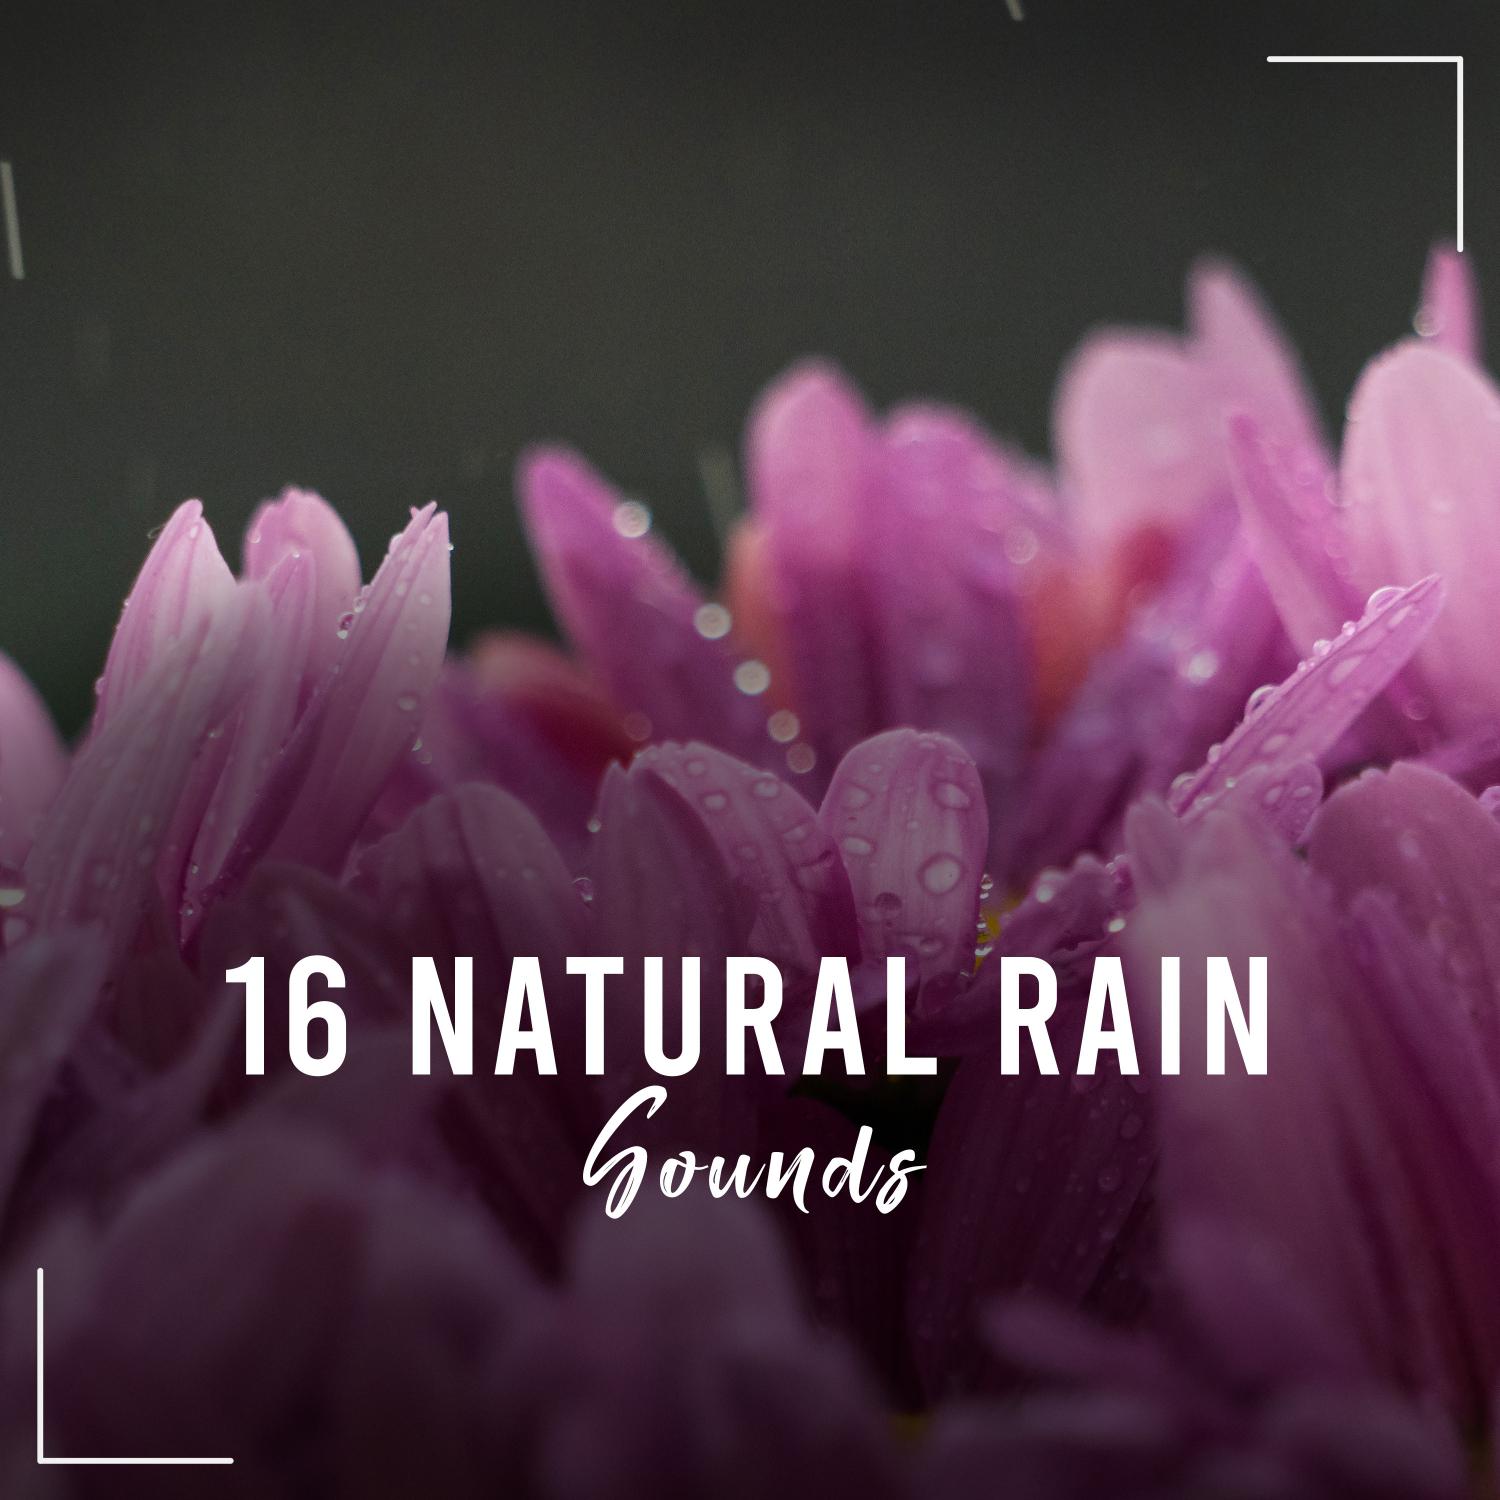 16 Natural Rain Sounds for Sleep, Relaxation, Yoga, Meditation, Zen, Peace and Calm